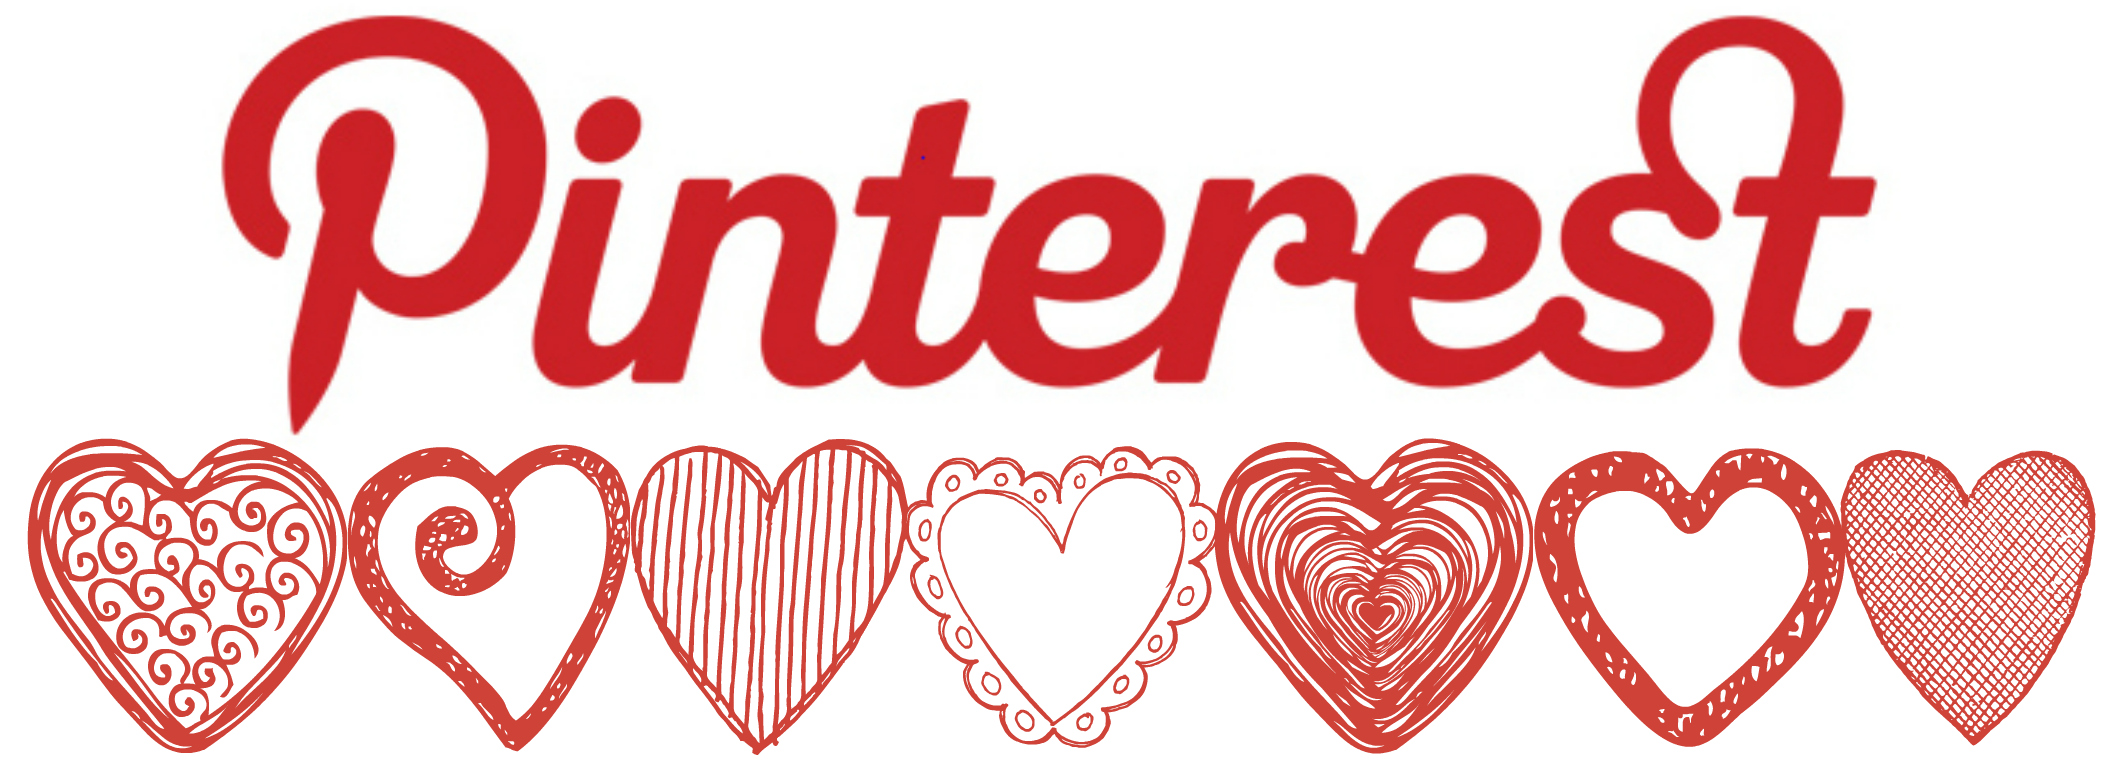 What takes your Pinterest?